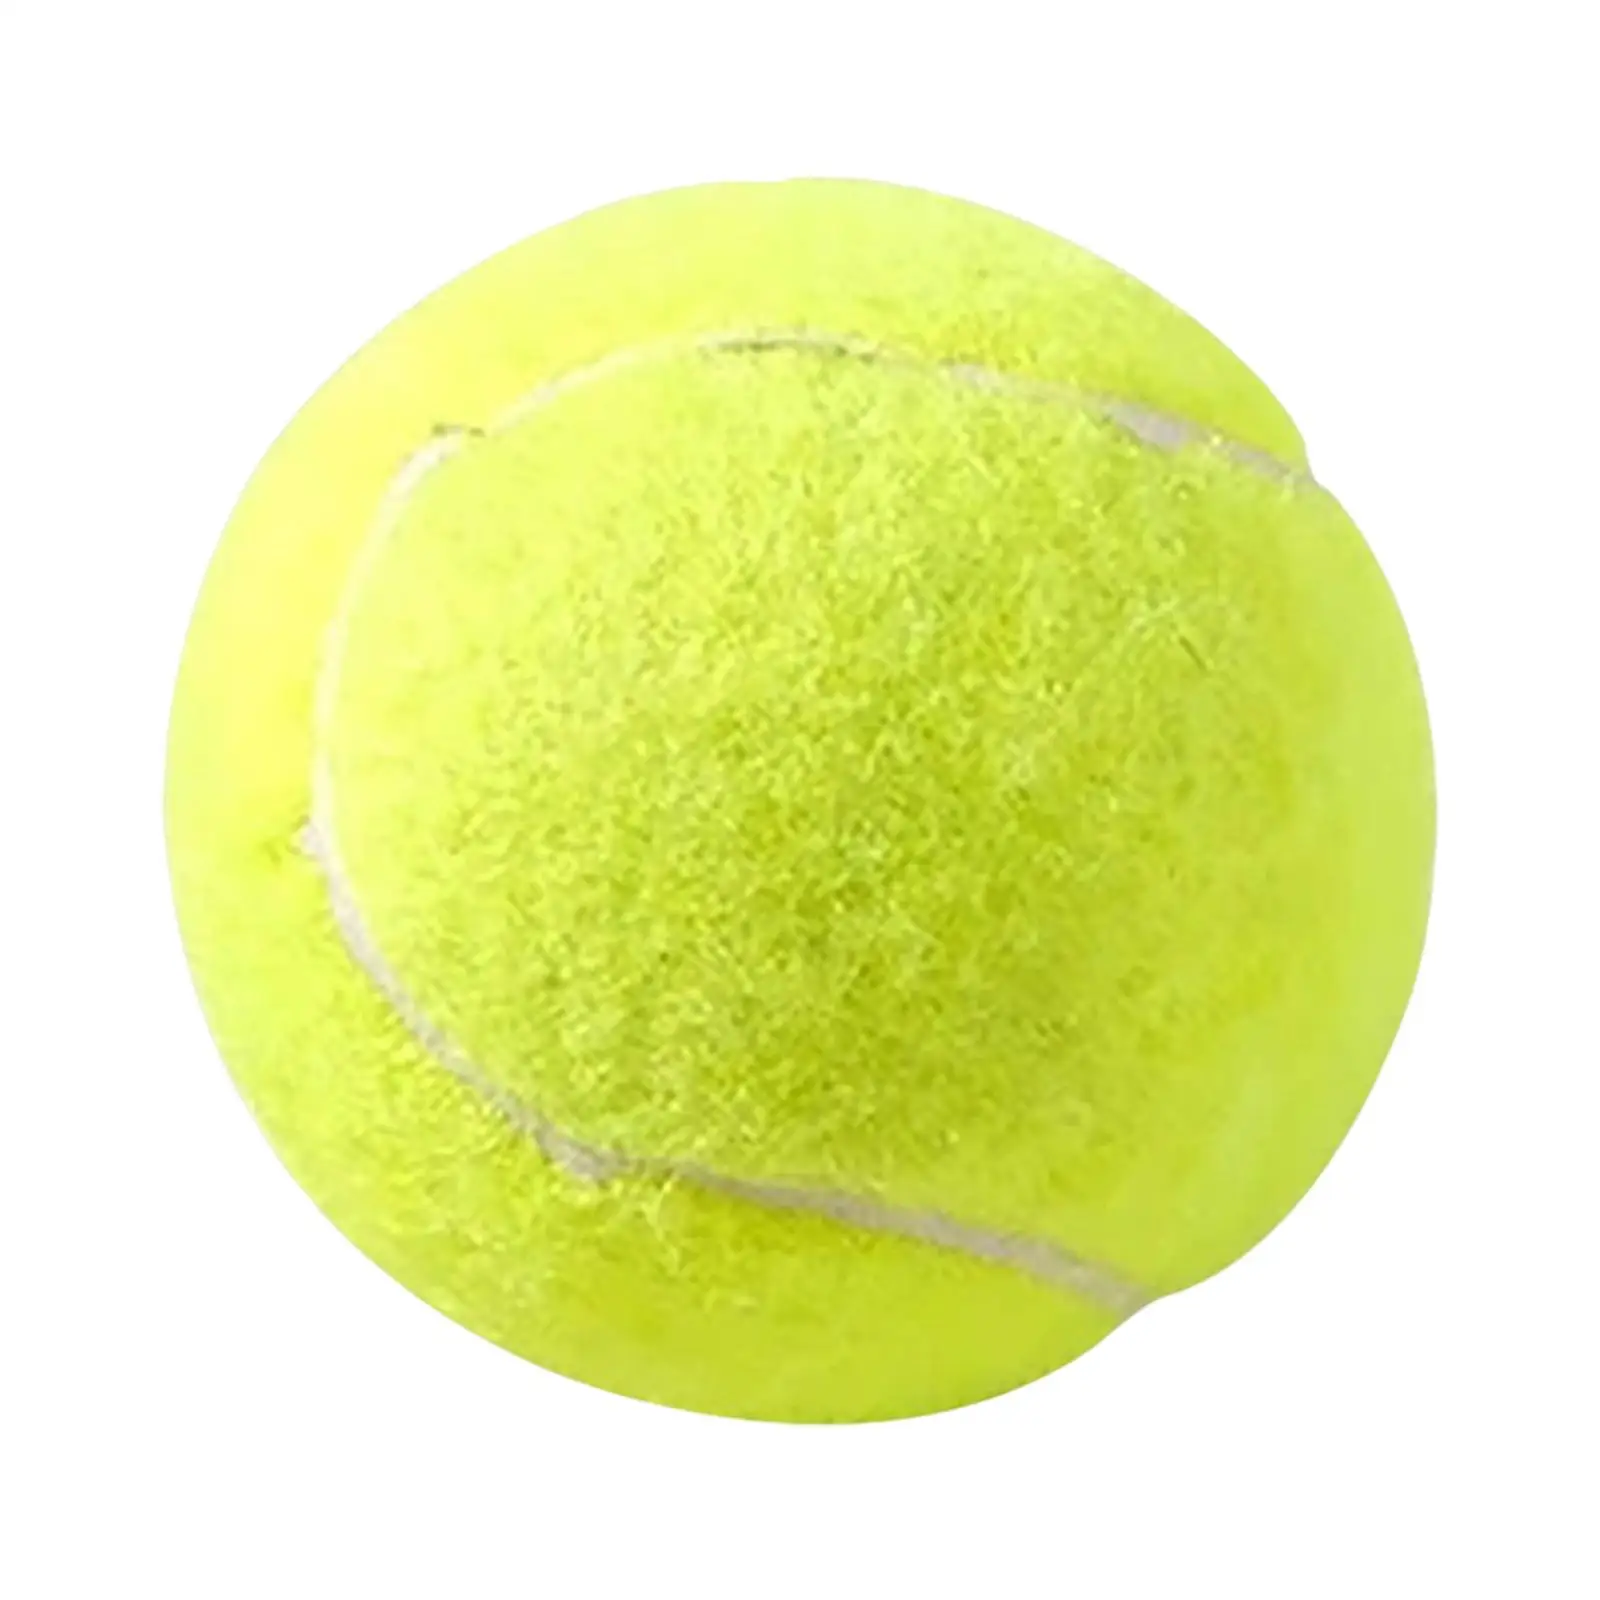 Ball Toy, Practice Strong Squeak Classic Chewers Rubber Interactive Toys Squeaky Dog Ball, for Training Exercise Tennis Dog